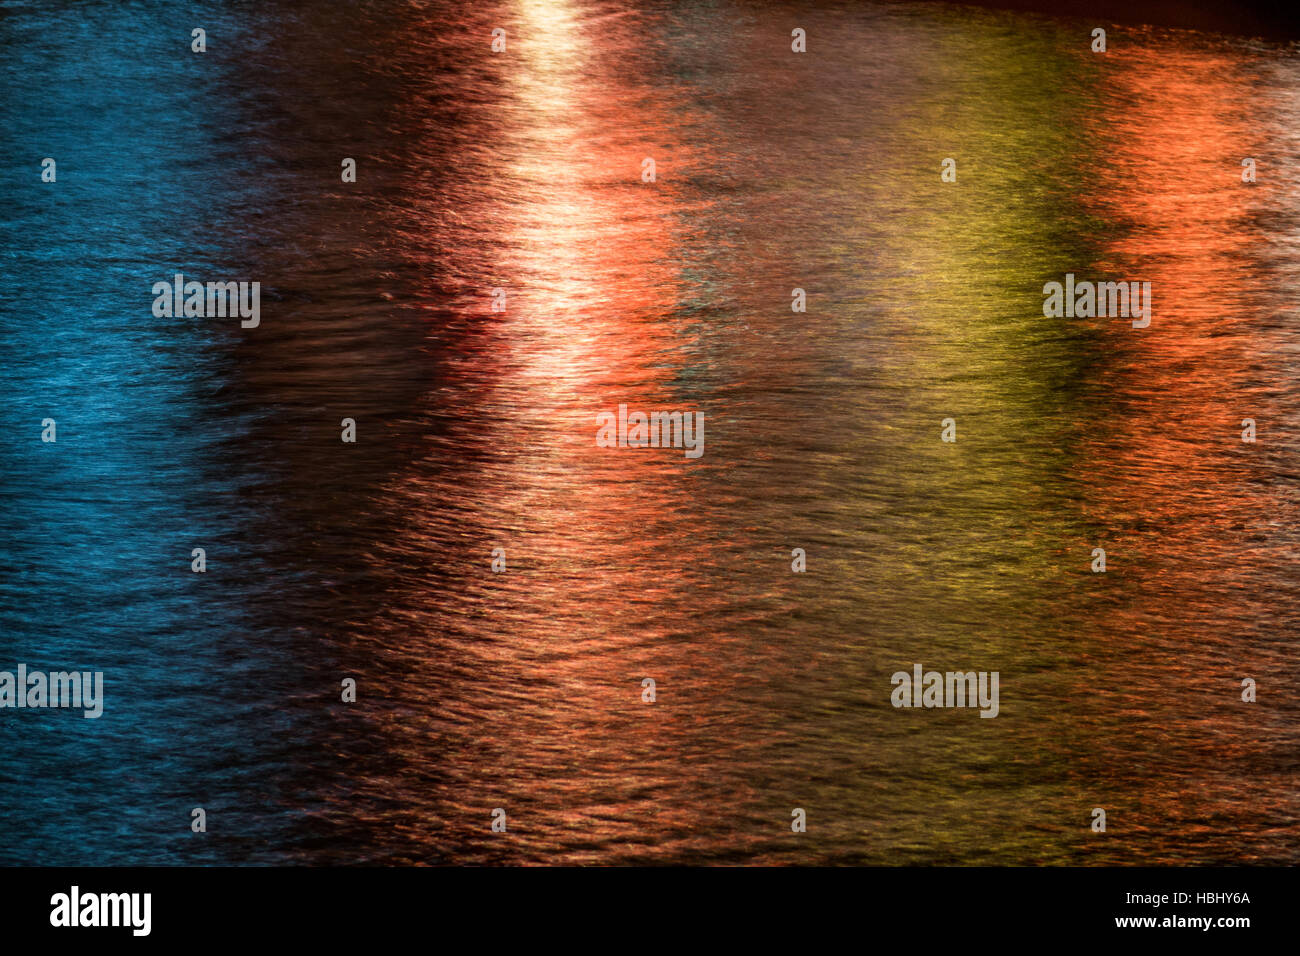 Abstract lights and water pattern Stock Photo